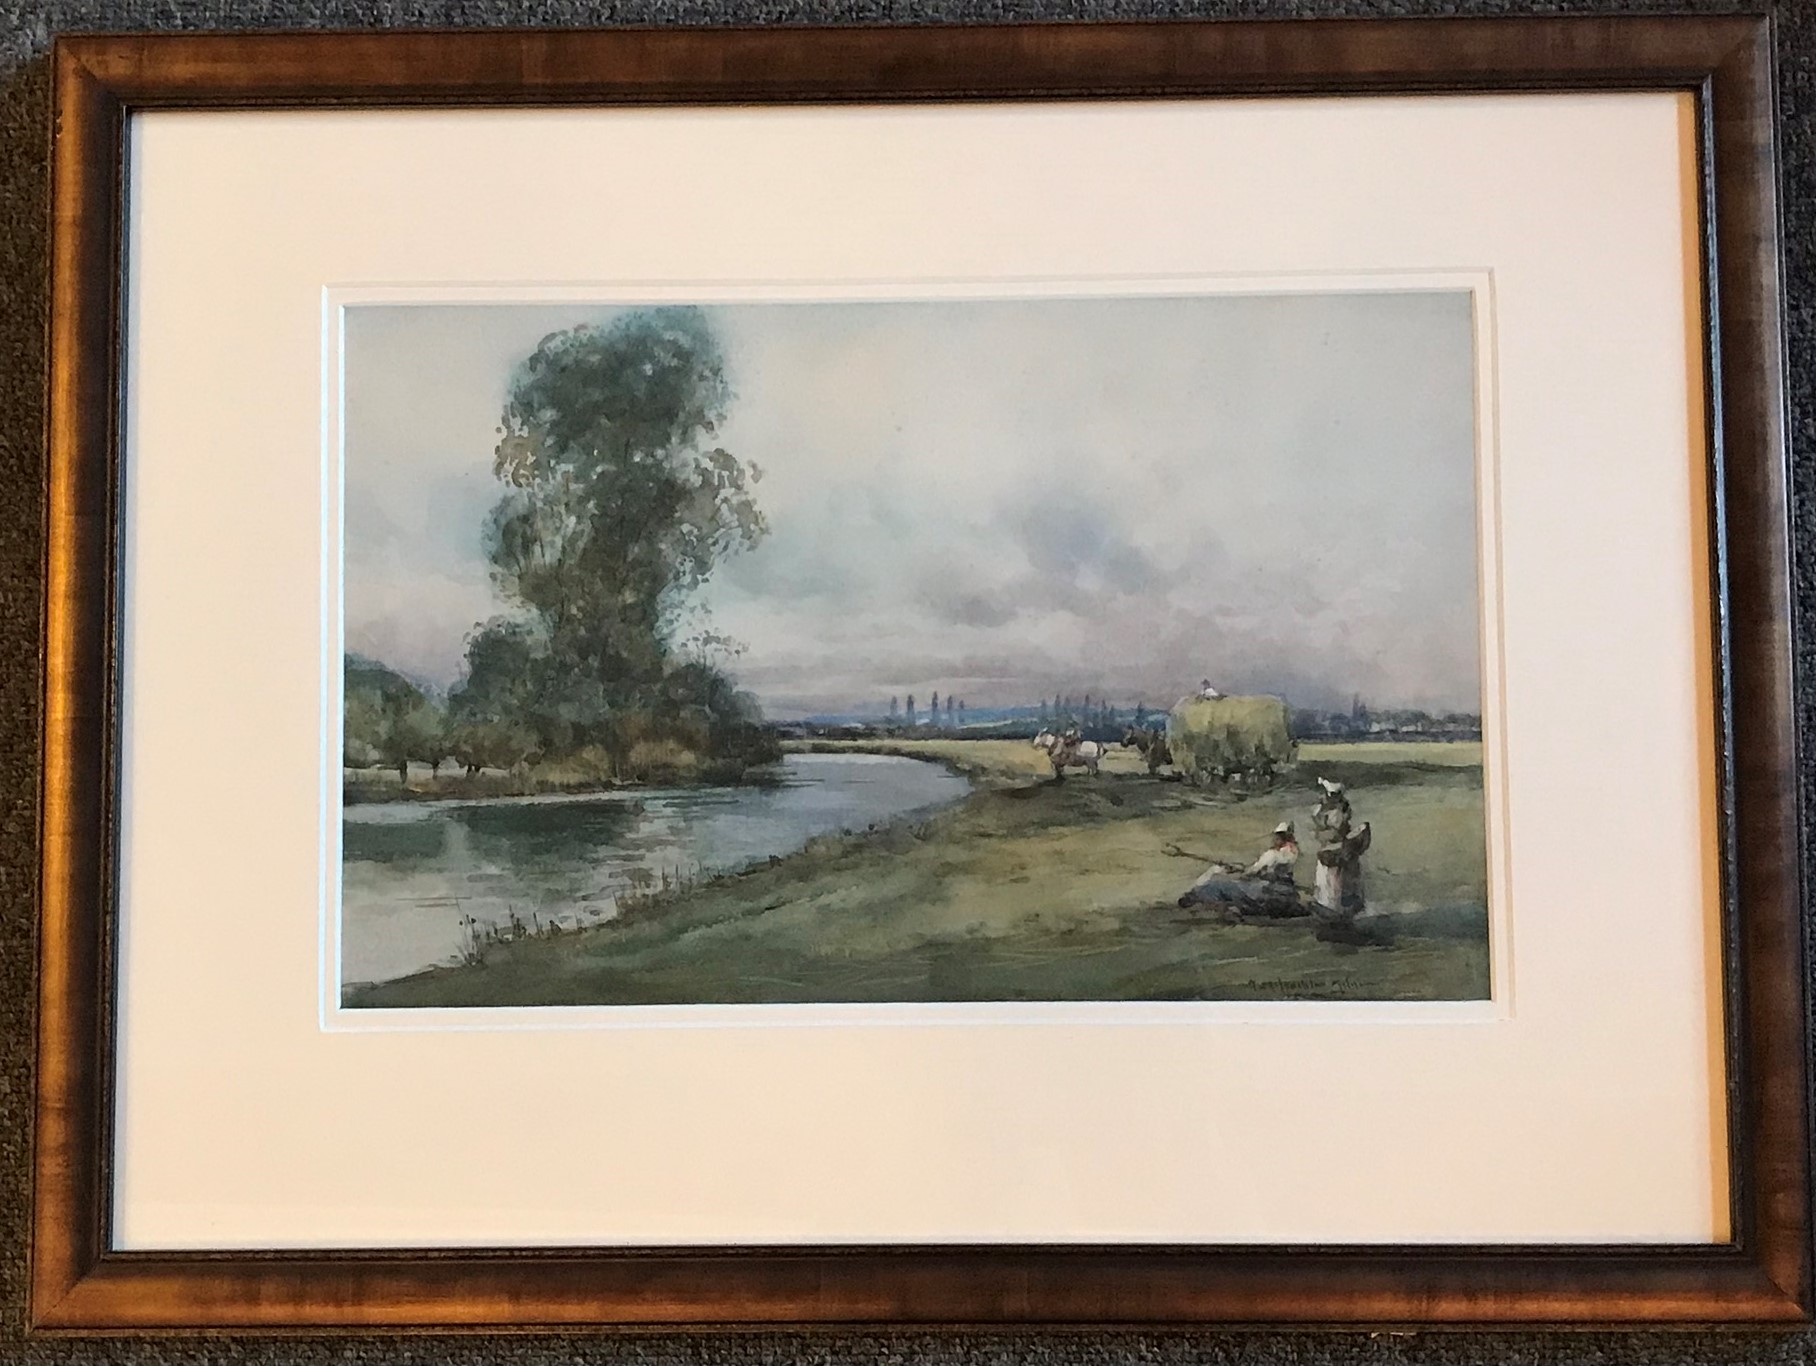 Bend in the River watercolour by Scottish artist John Maclauchlan Milne 1886-1957 Exhib R.S.A, R.A - Image 3 of 4